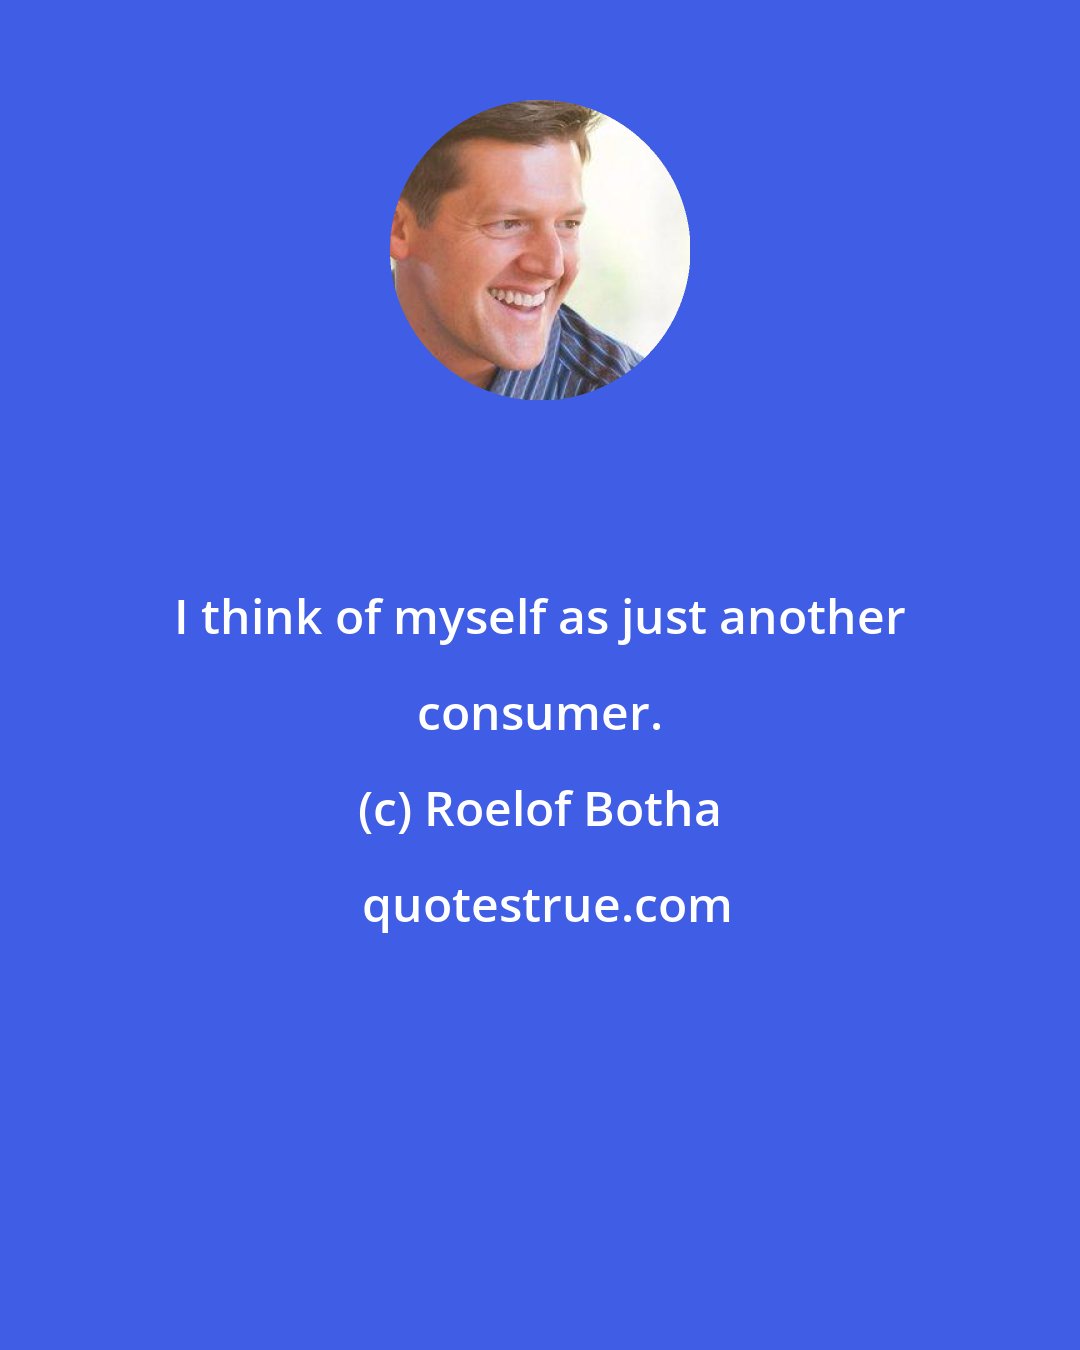 Roelof Botha: I think of myself as just another consumer.